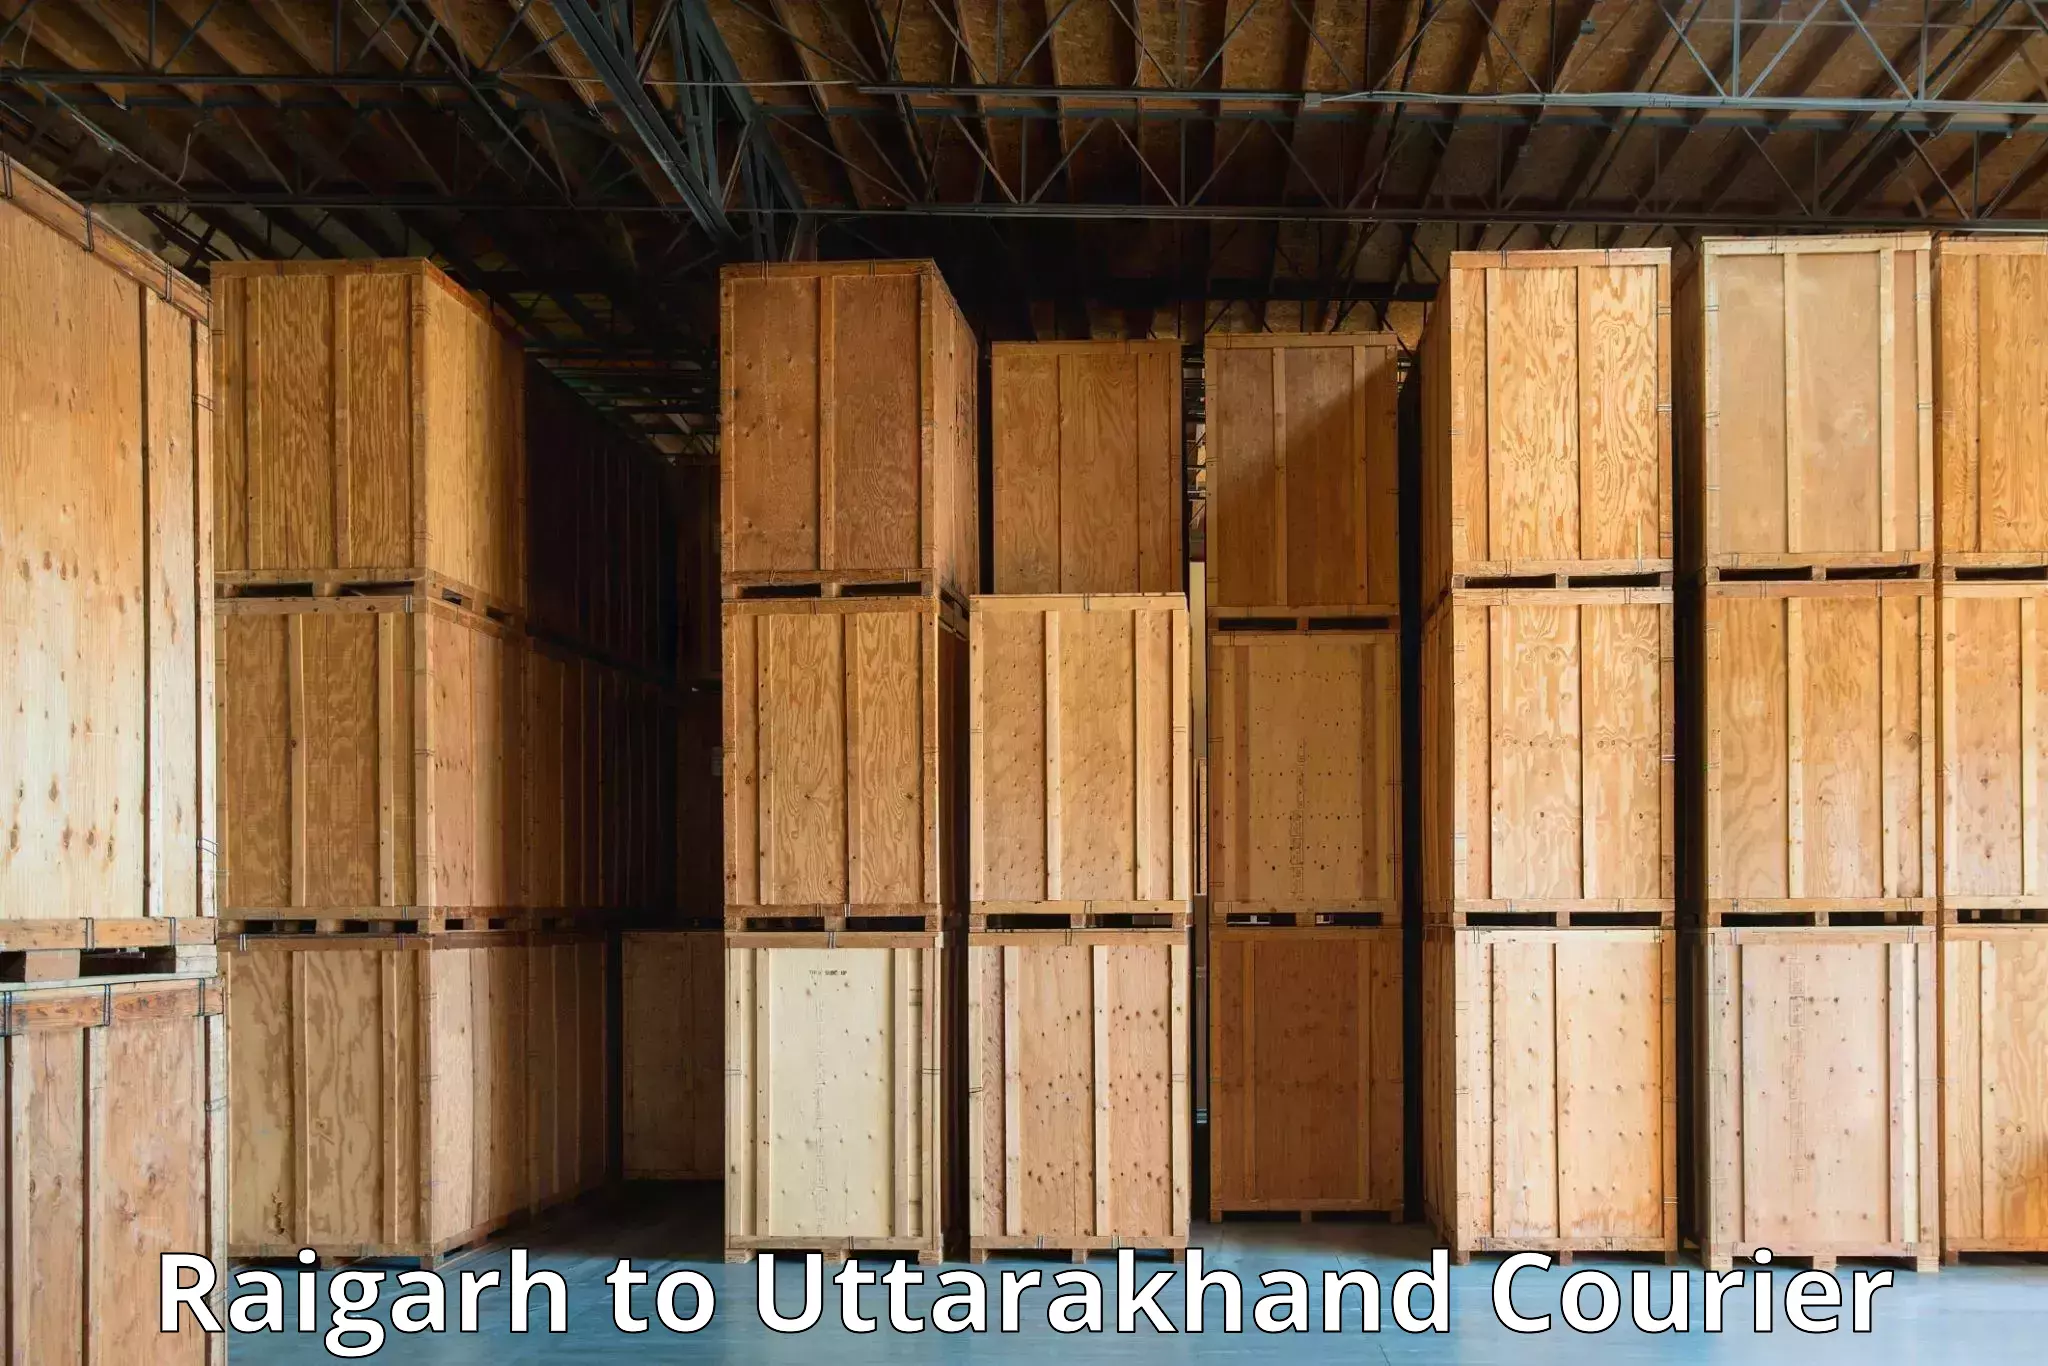 Local delivery service Raigarh to Uttarakhand